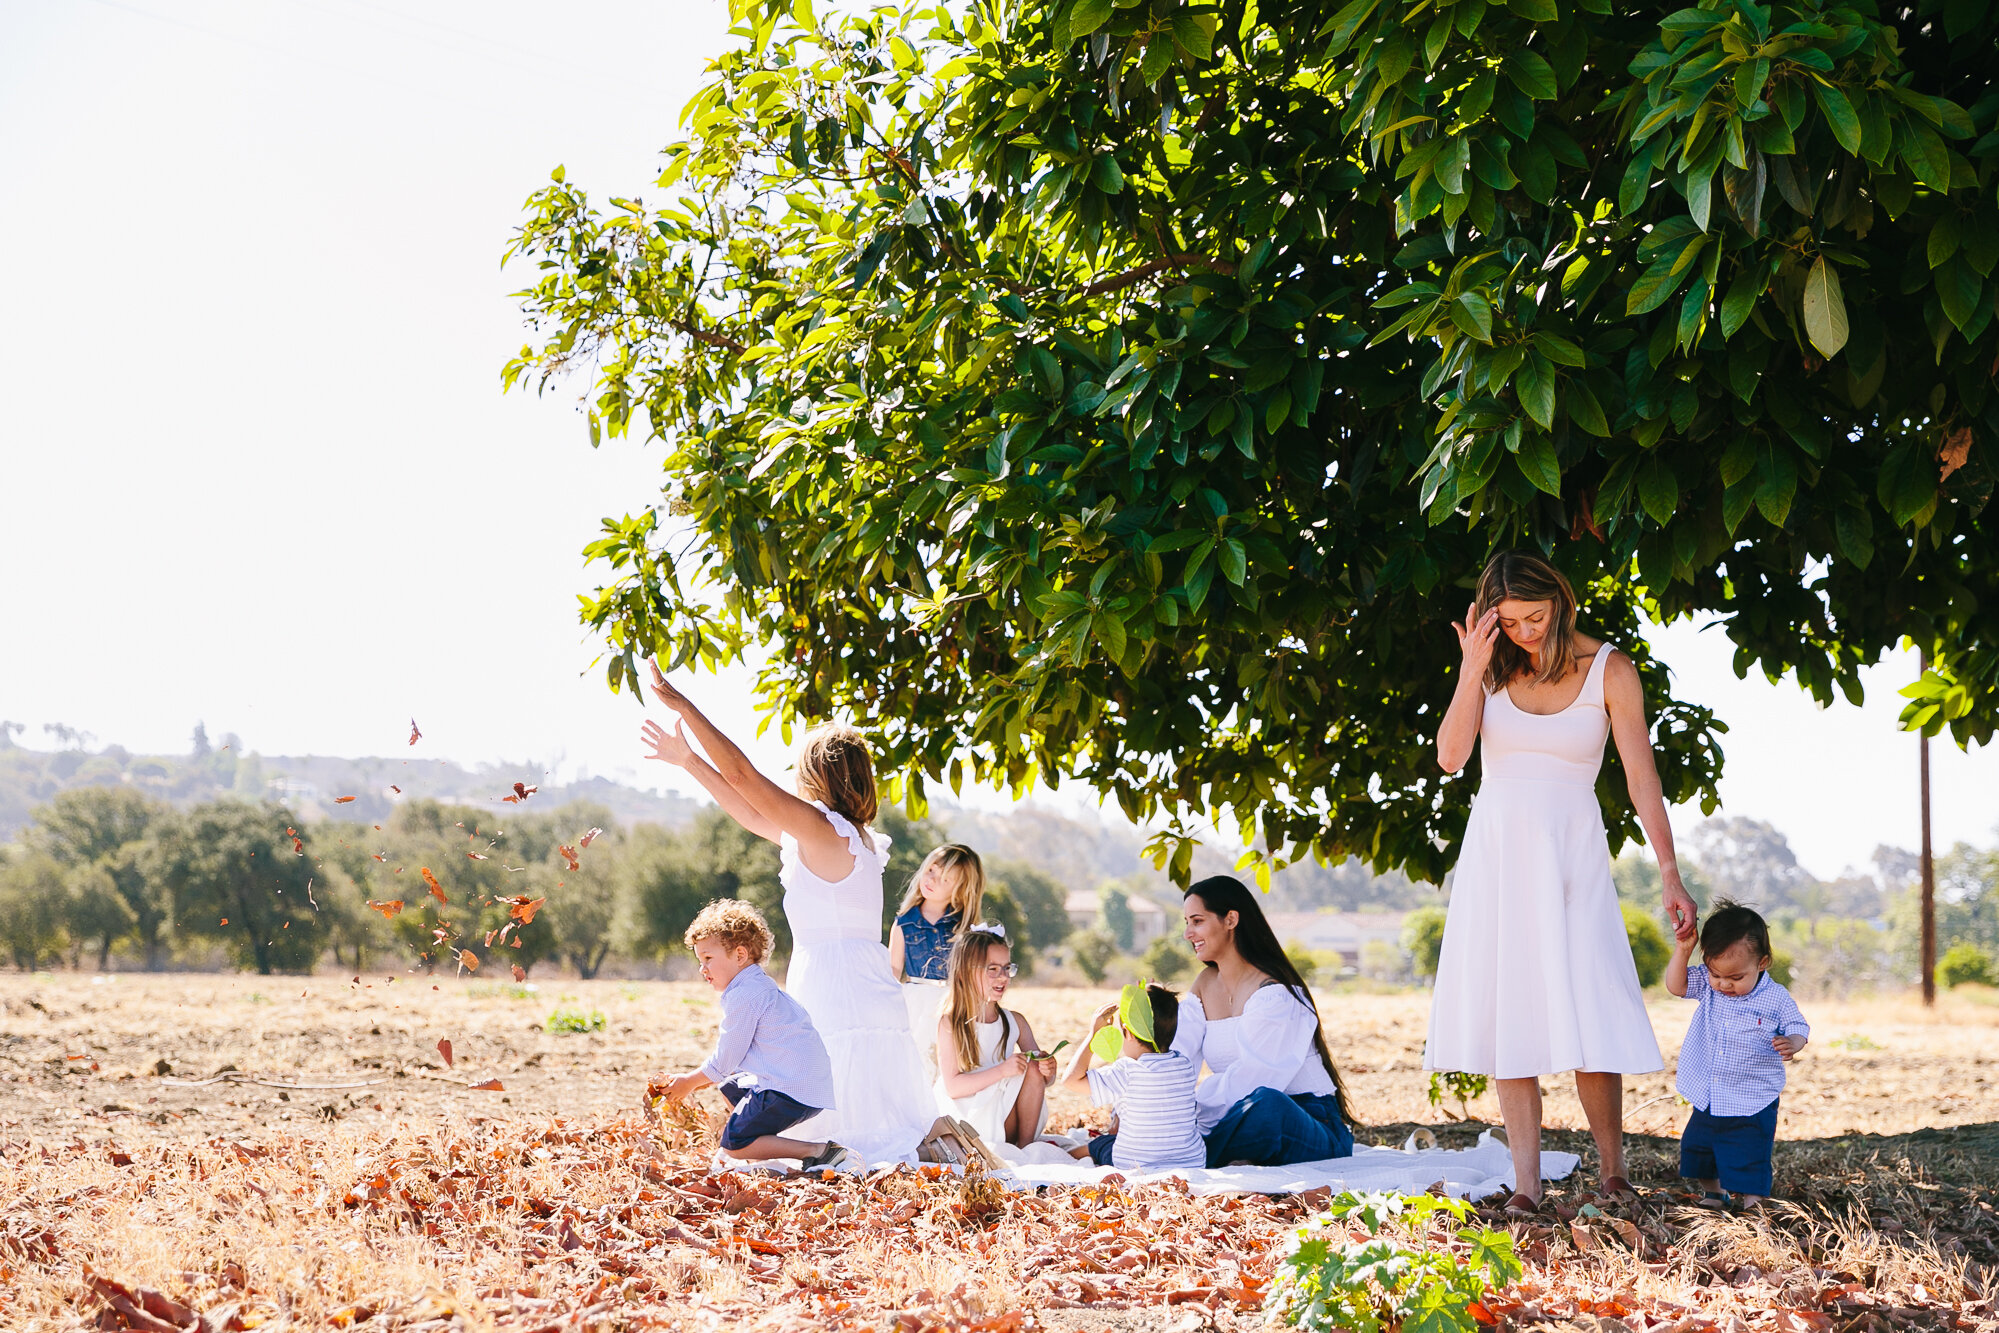 Los_Angeles_Family_Photography_Orange_County_Children_Babies_Field_Farm_Outdoors_Morning_Session_California_Girls_Boys_Kids_Photography-1230.jpg